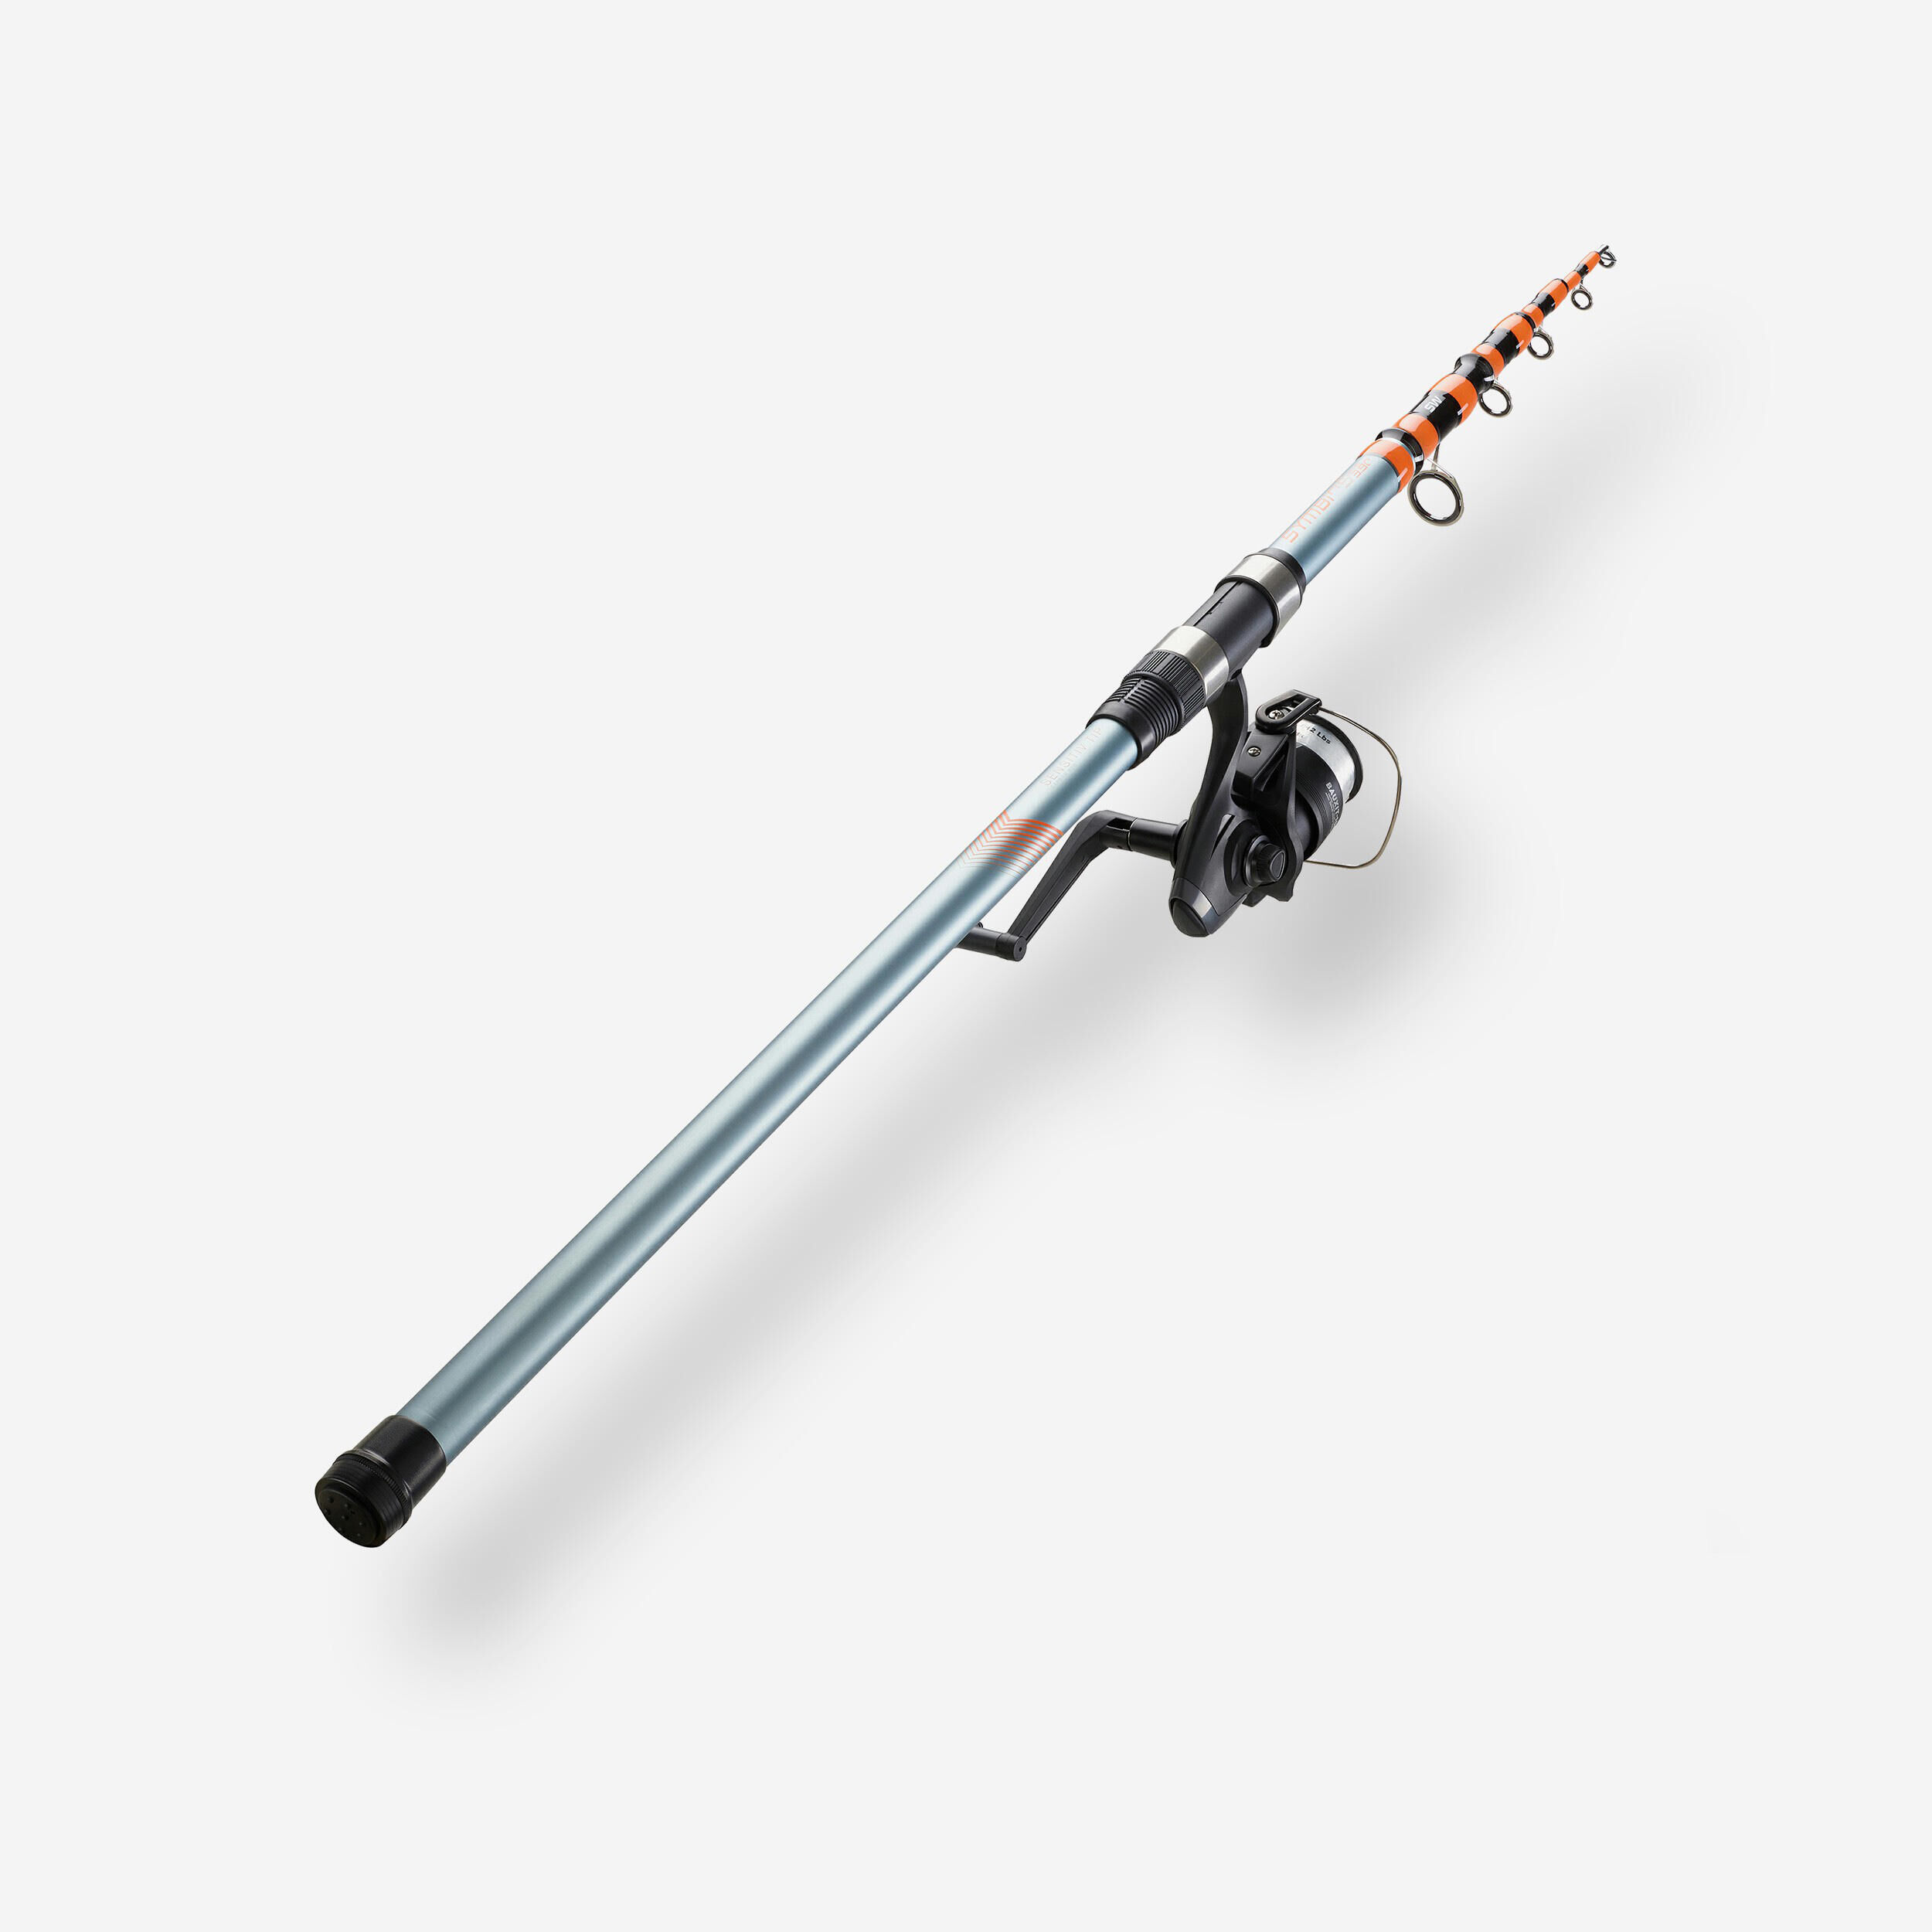 CAPERLAN Fishing surfcasting rod and reel combo SYMBIOS LIGHT-100 390 80-150 g